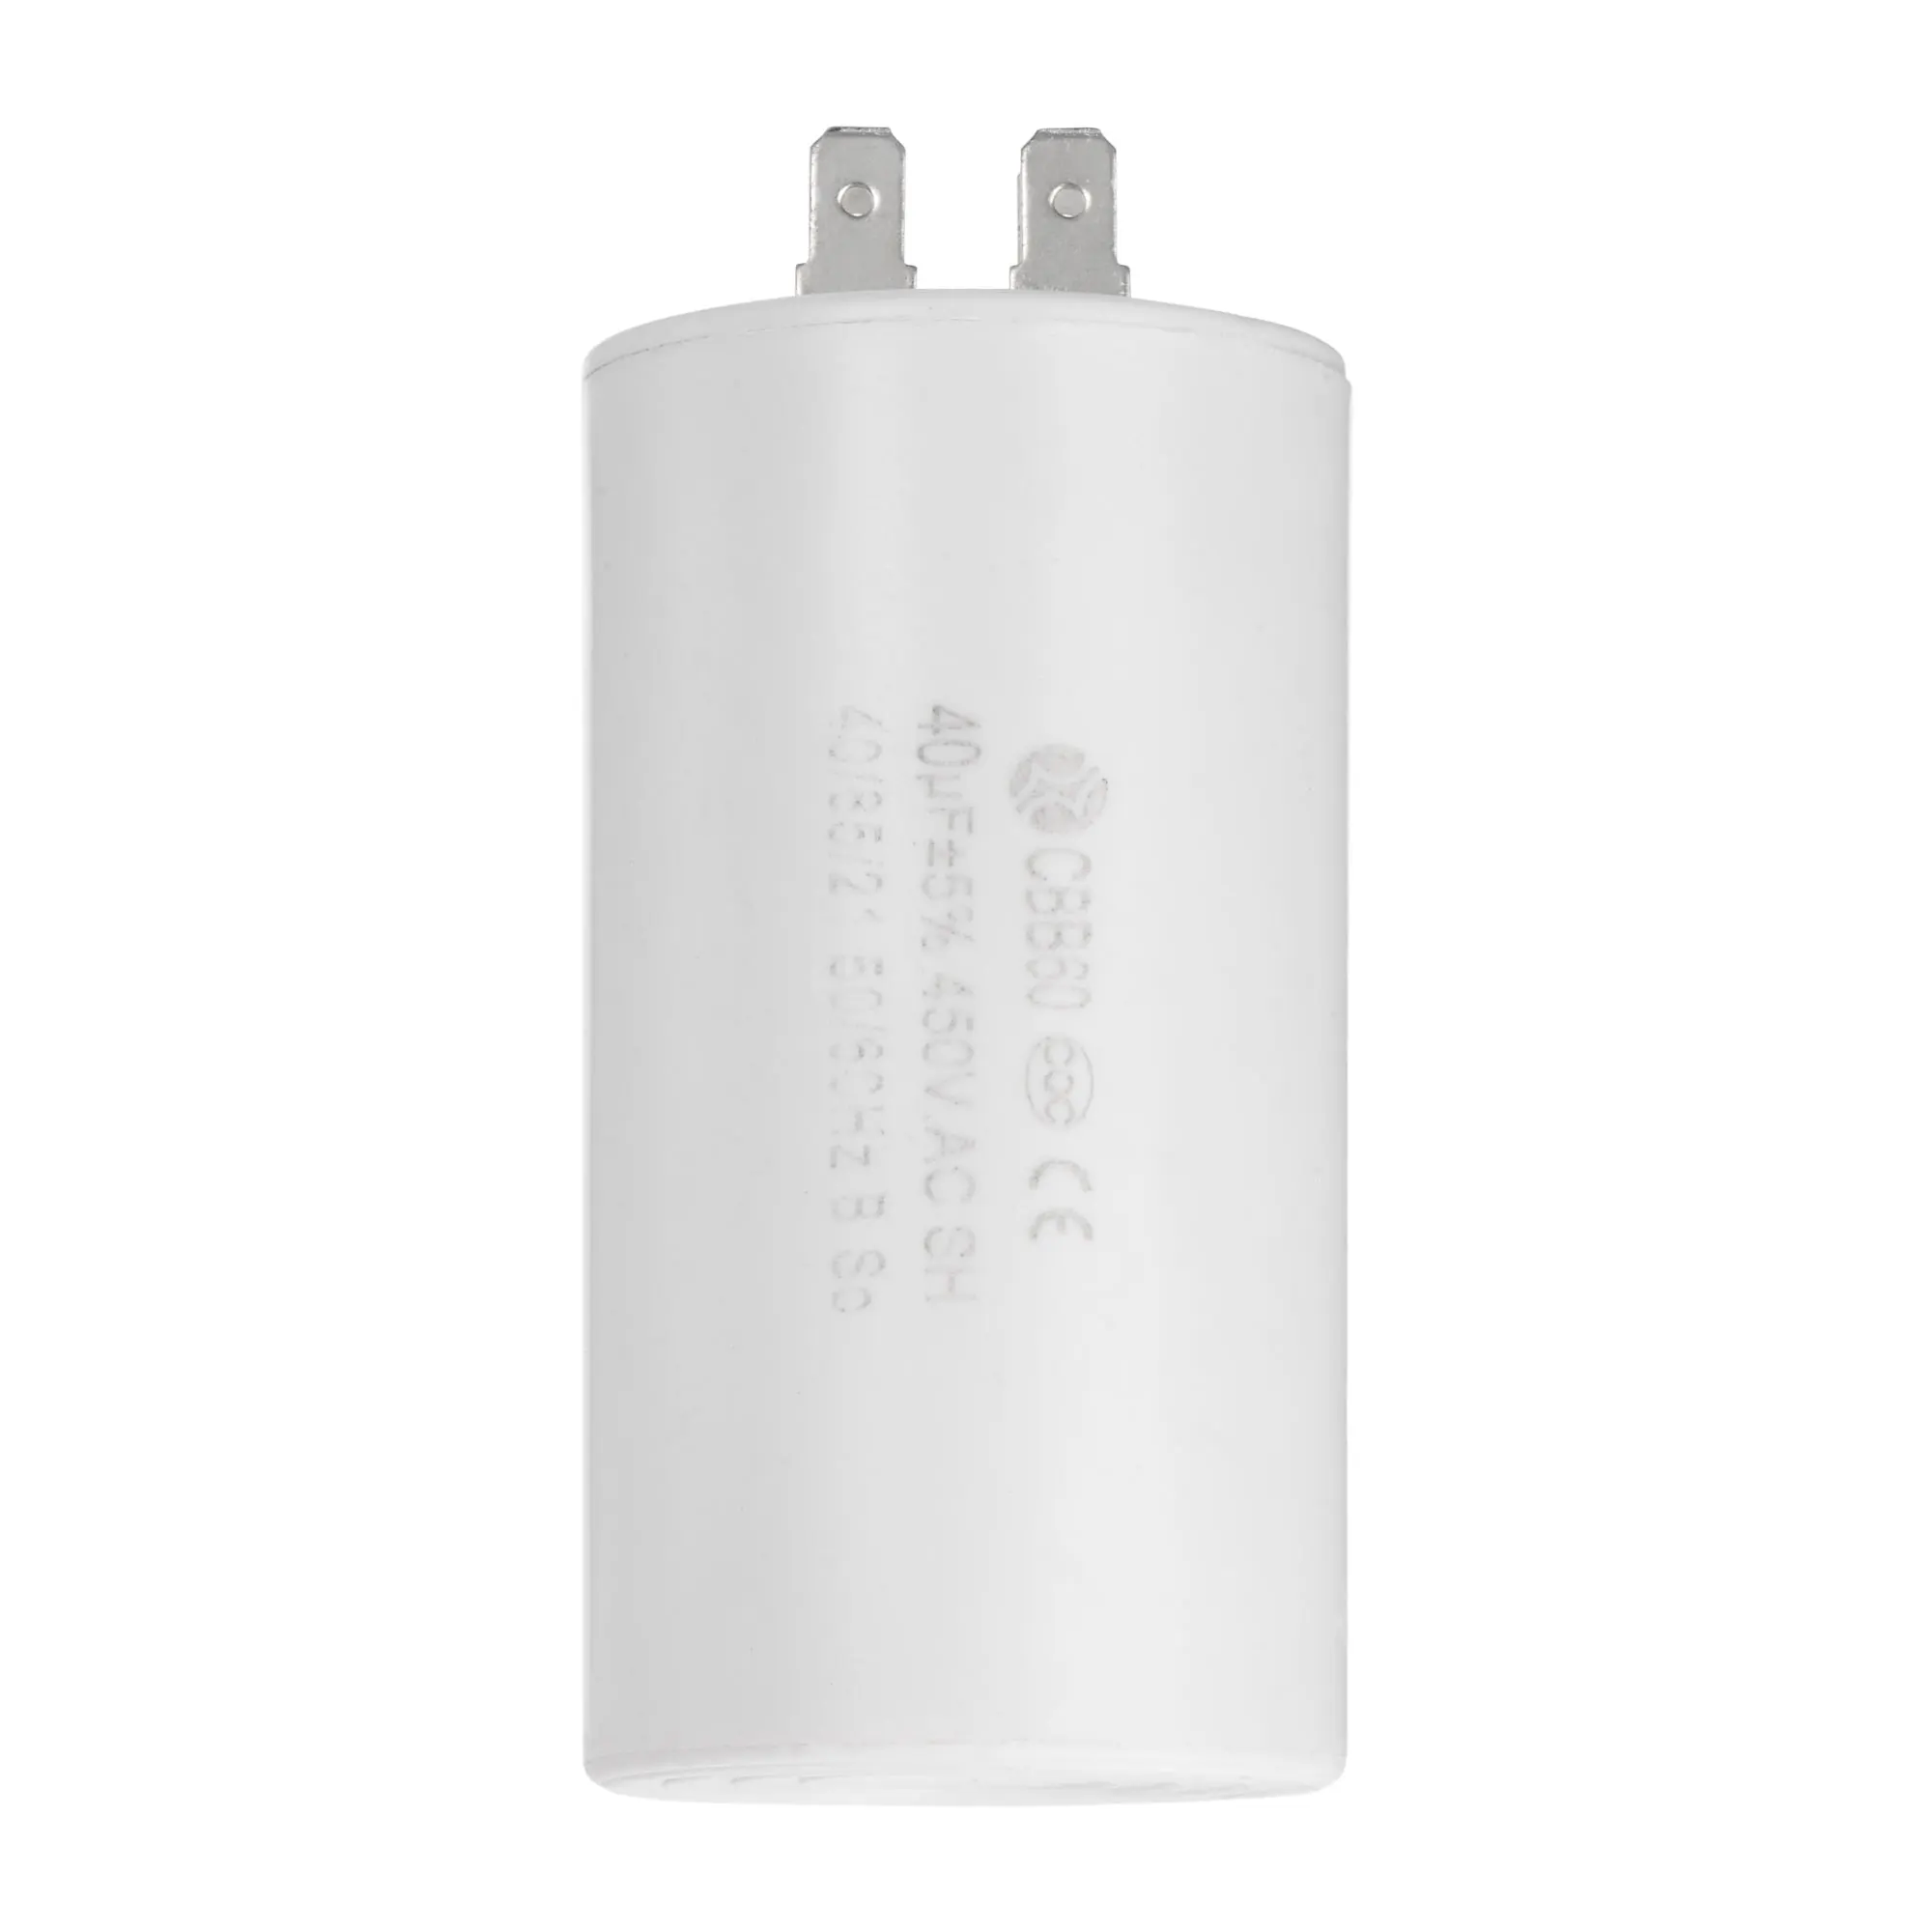 uxcell CBB60 Run Capacitor 40uF 450V AC Double Insert 50/60Hz Cylinder 94x49mm White for Air Compressor Water Pump Motor